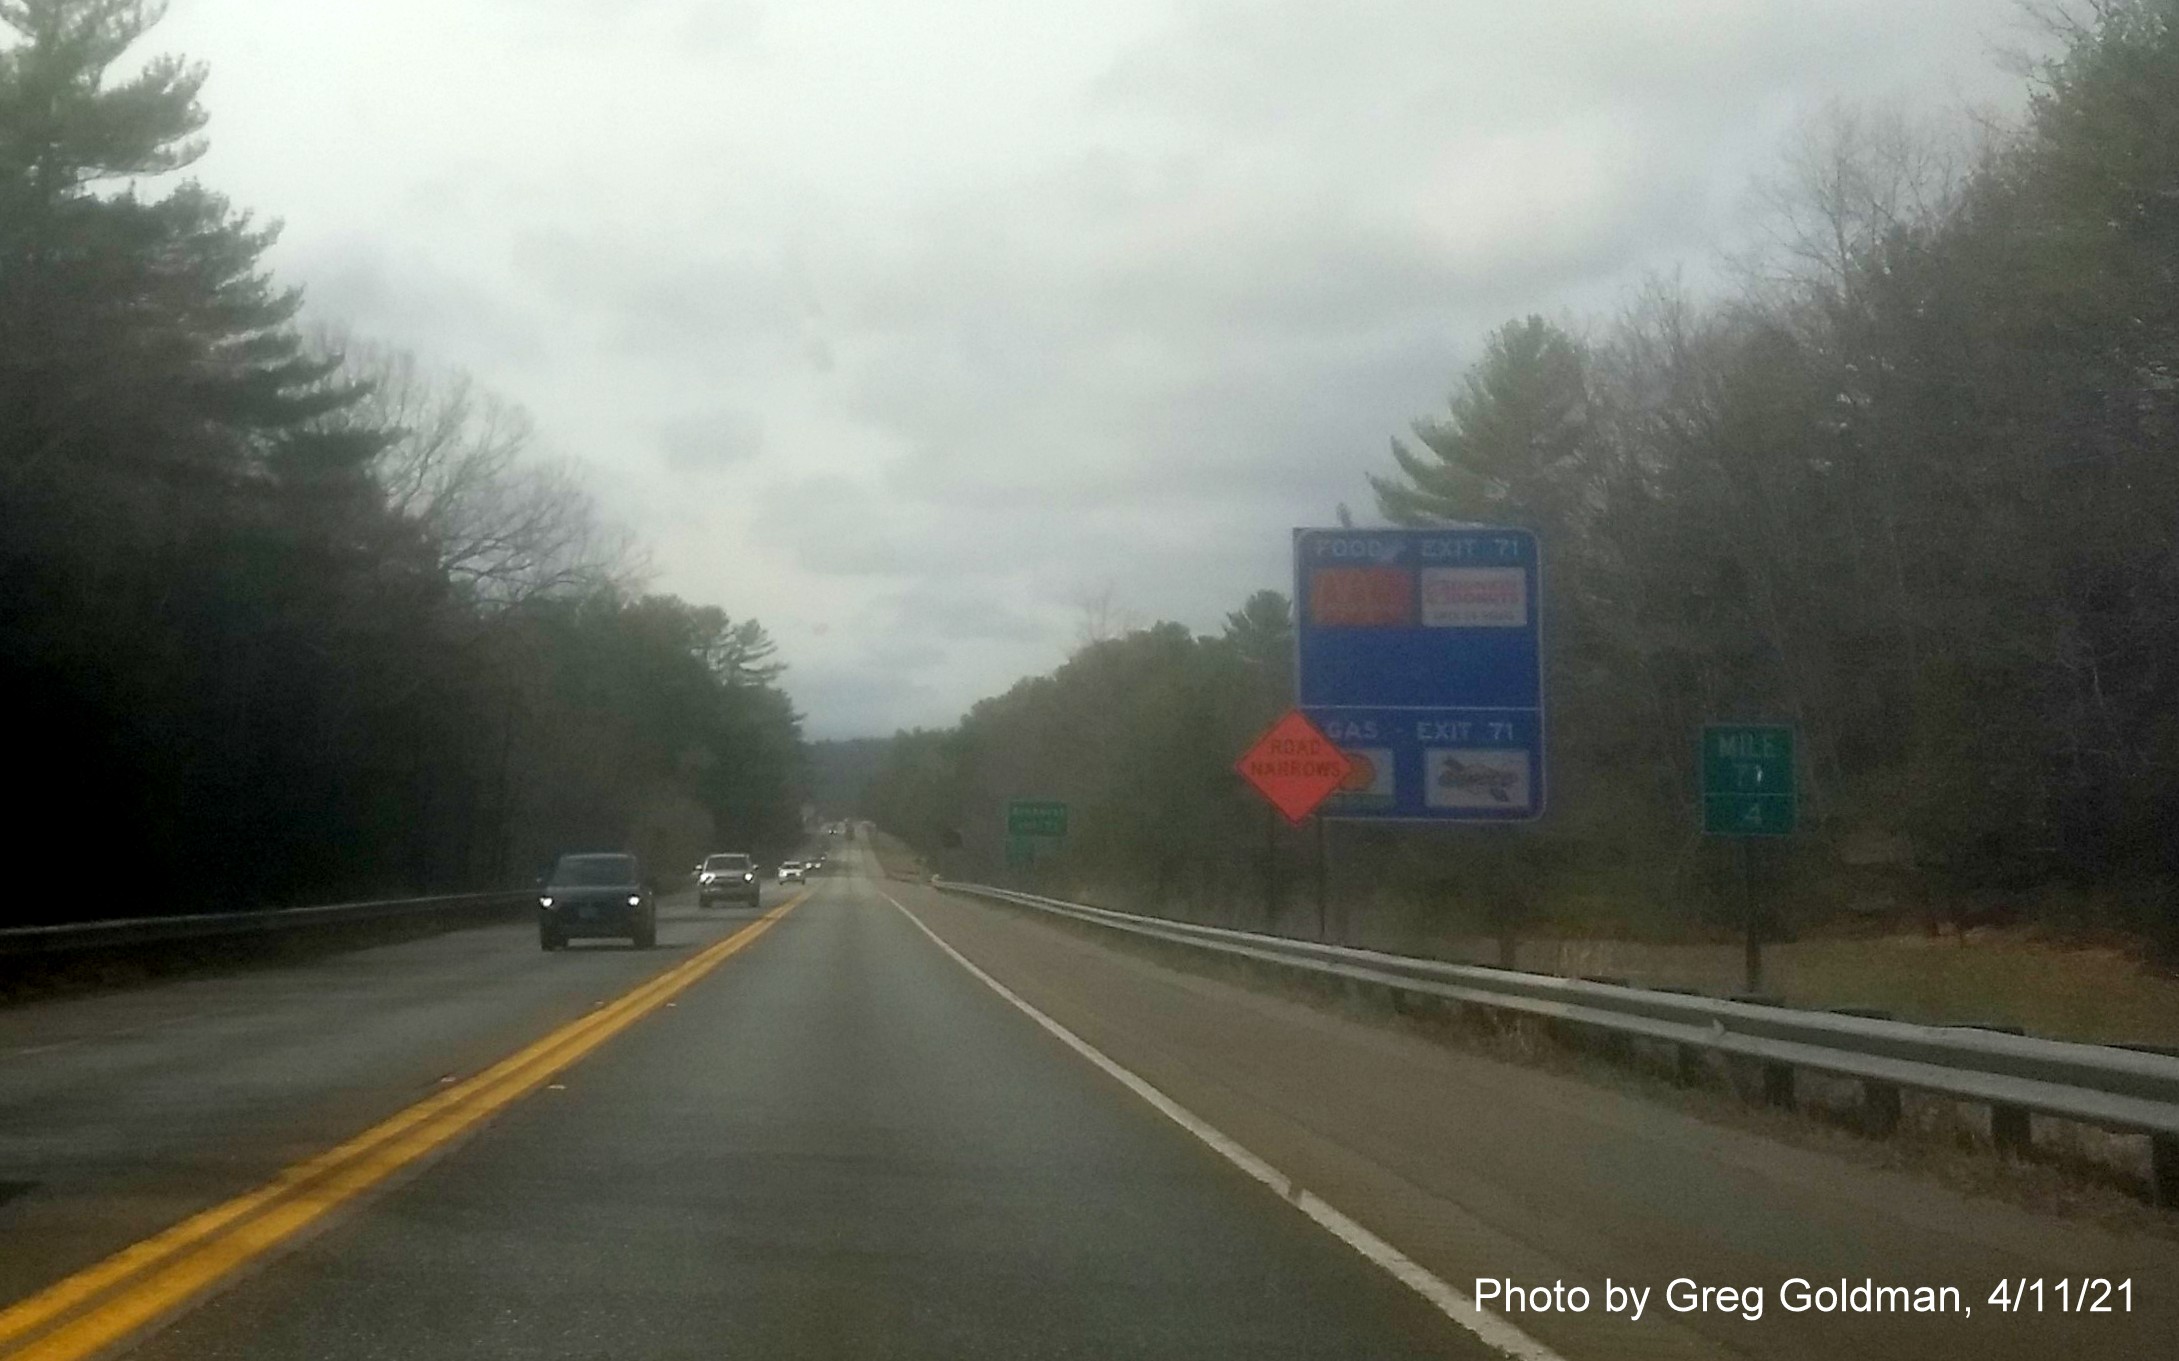 Image of blue Food Services sign for US 202 South exit with new milepost based exit number on MA 2 West in Athol, by Greg Goldman, April 2021